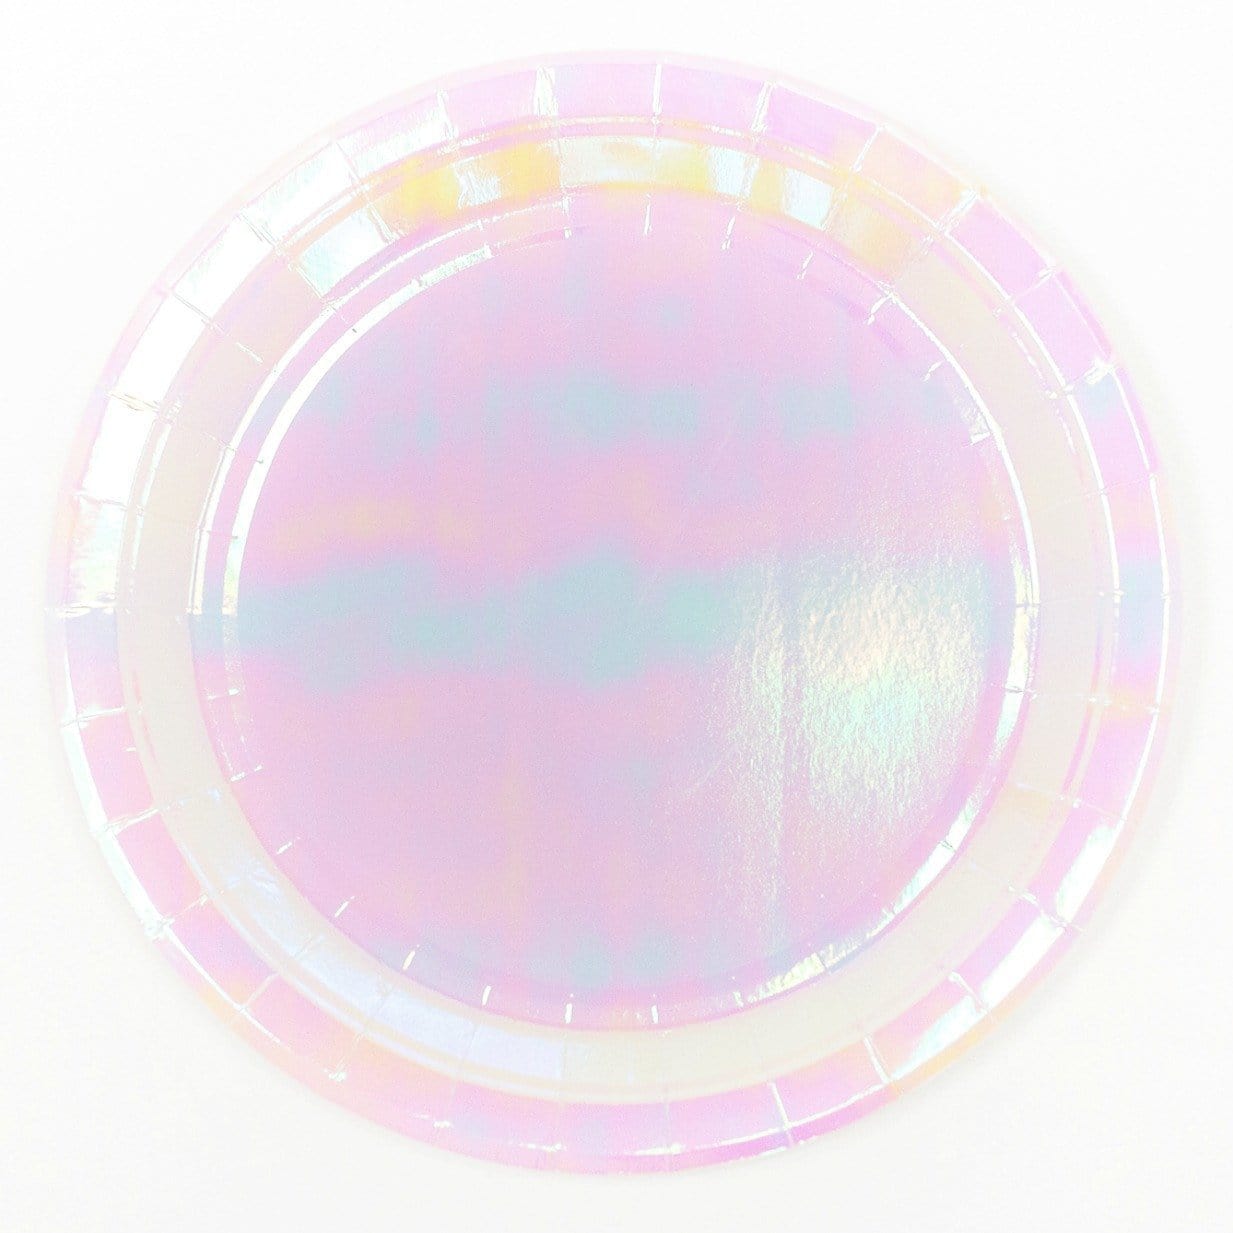 Iridescent Party Plates | Modern Paper Plates | Disco Party Supplies Creative Converting